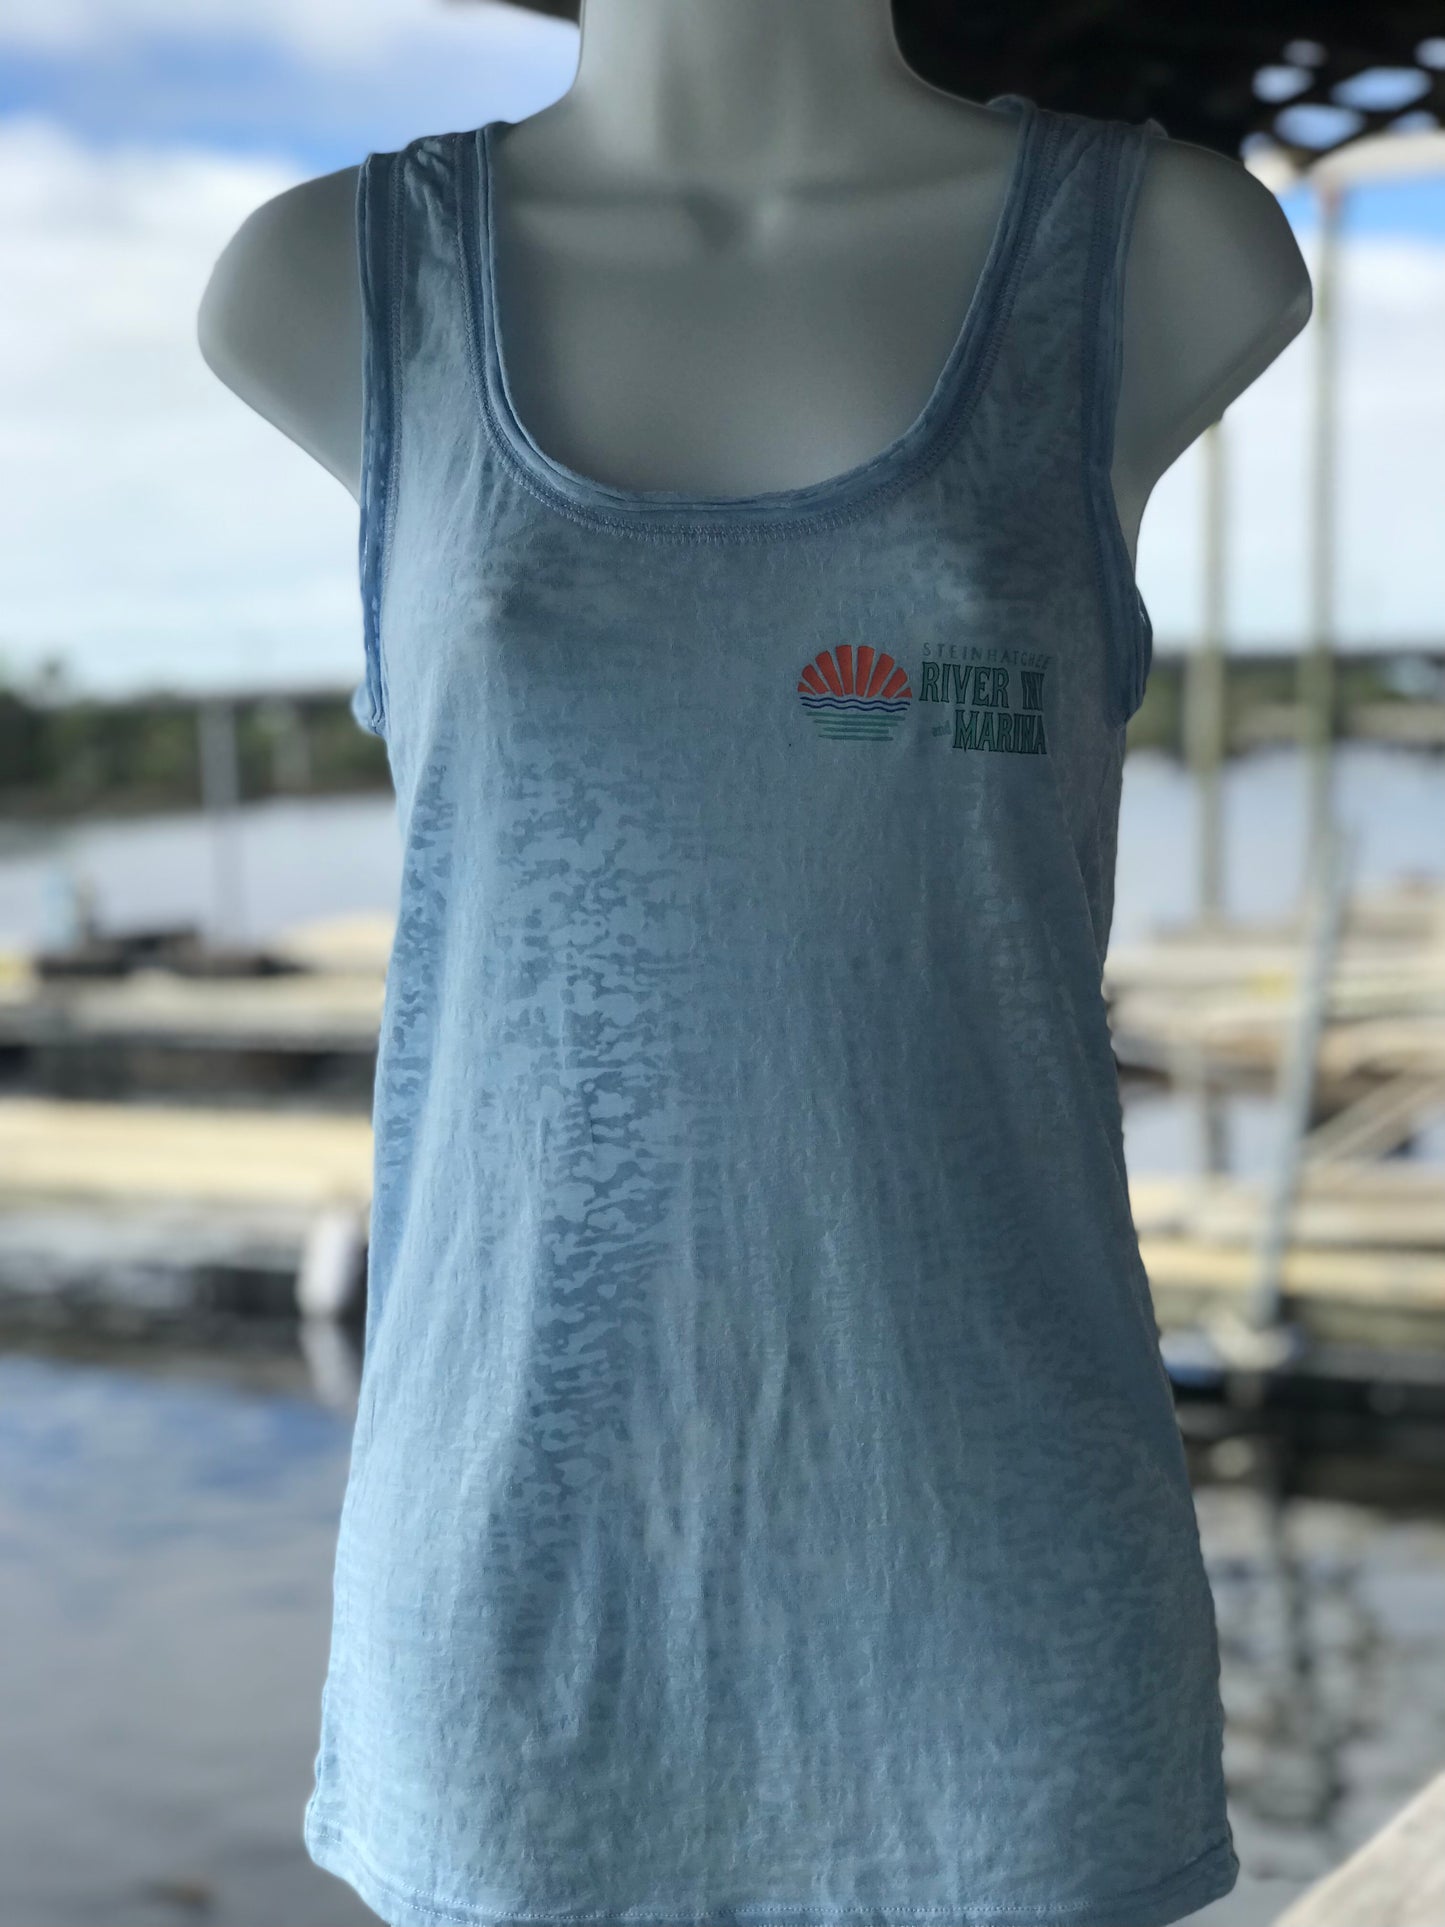 Tank Top Steinhatchee River Inn and Marina with Dive Flag and Scallop design